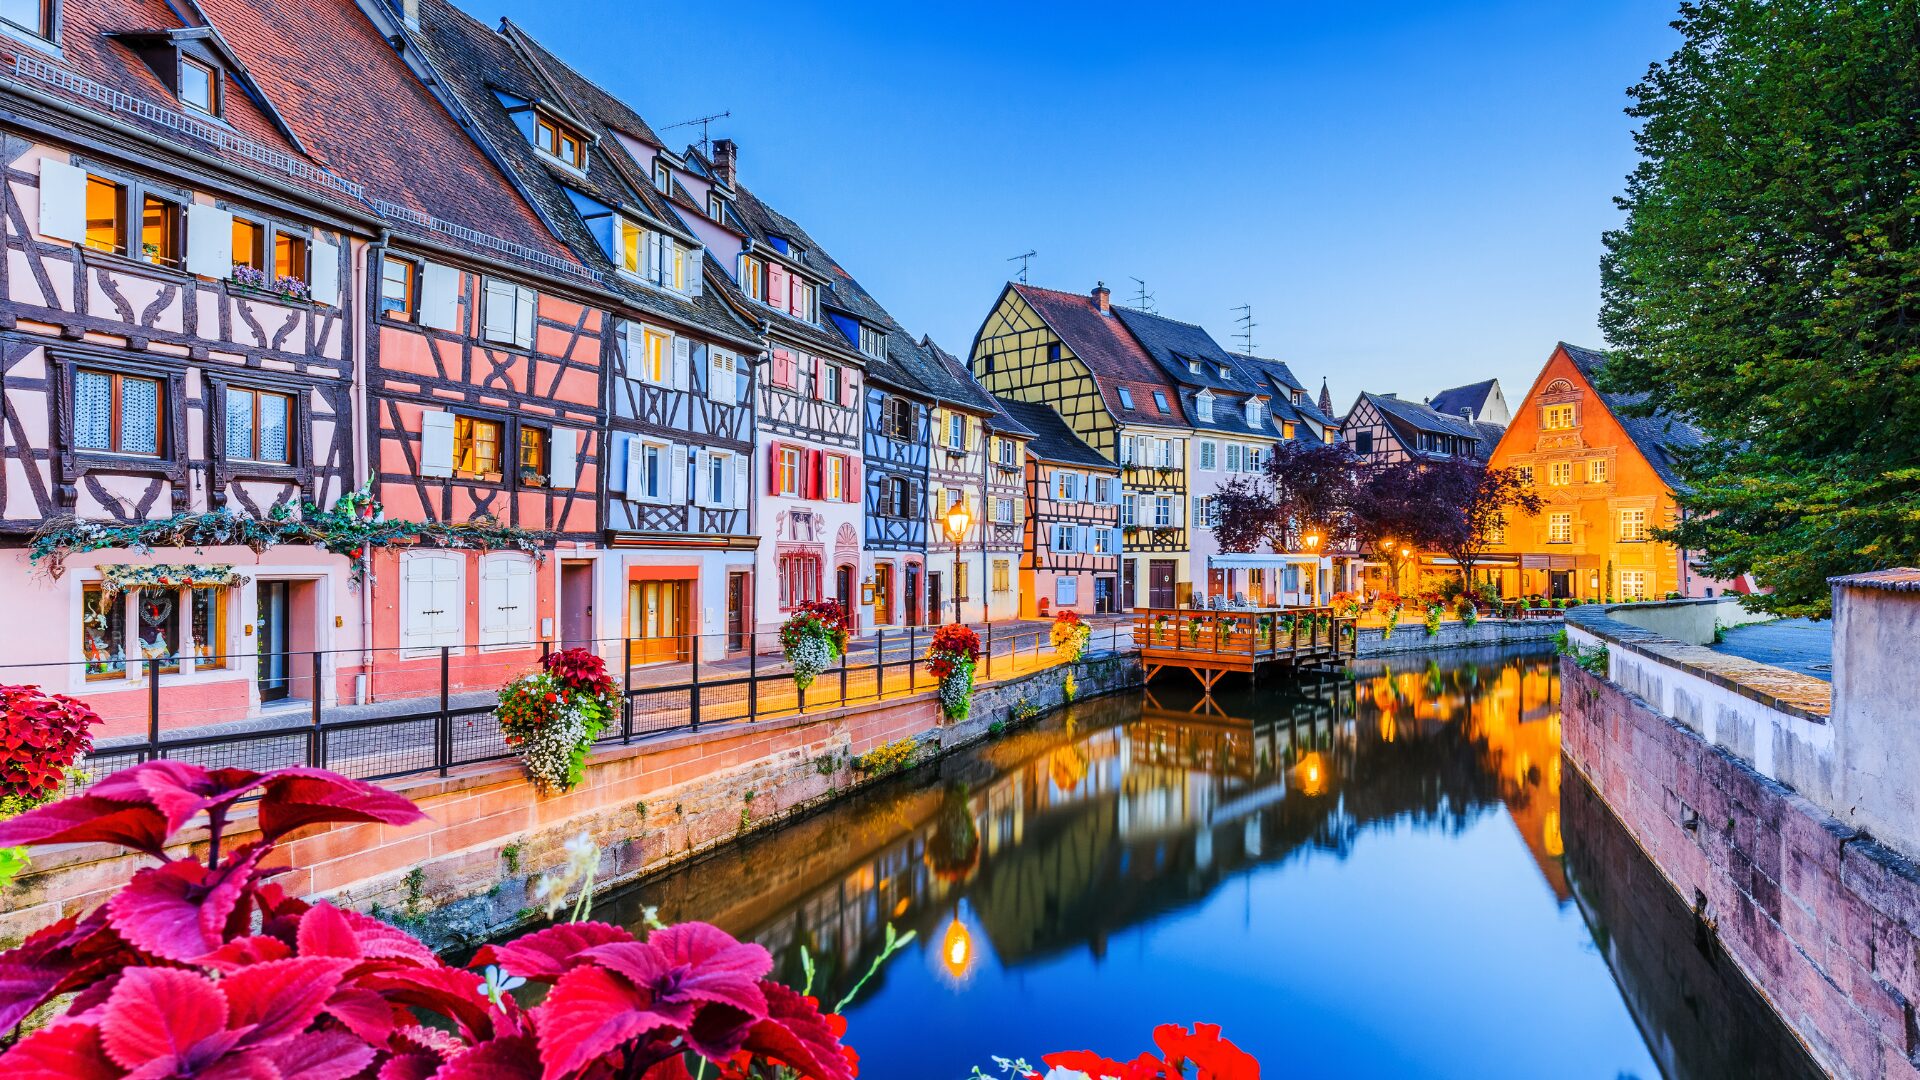 The picturesque town of Colmar in France